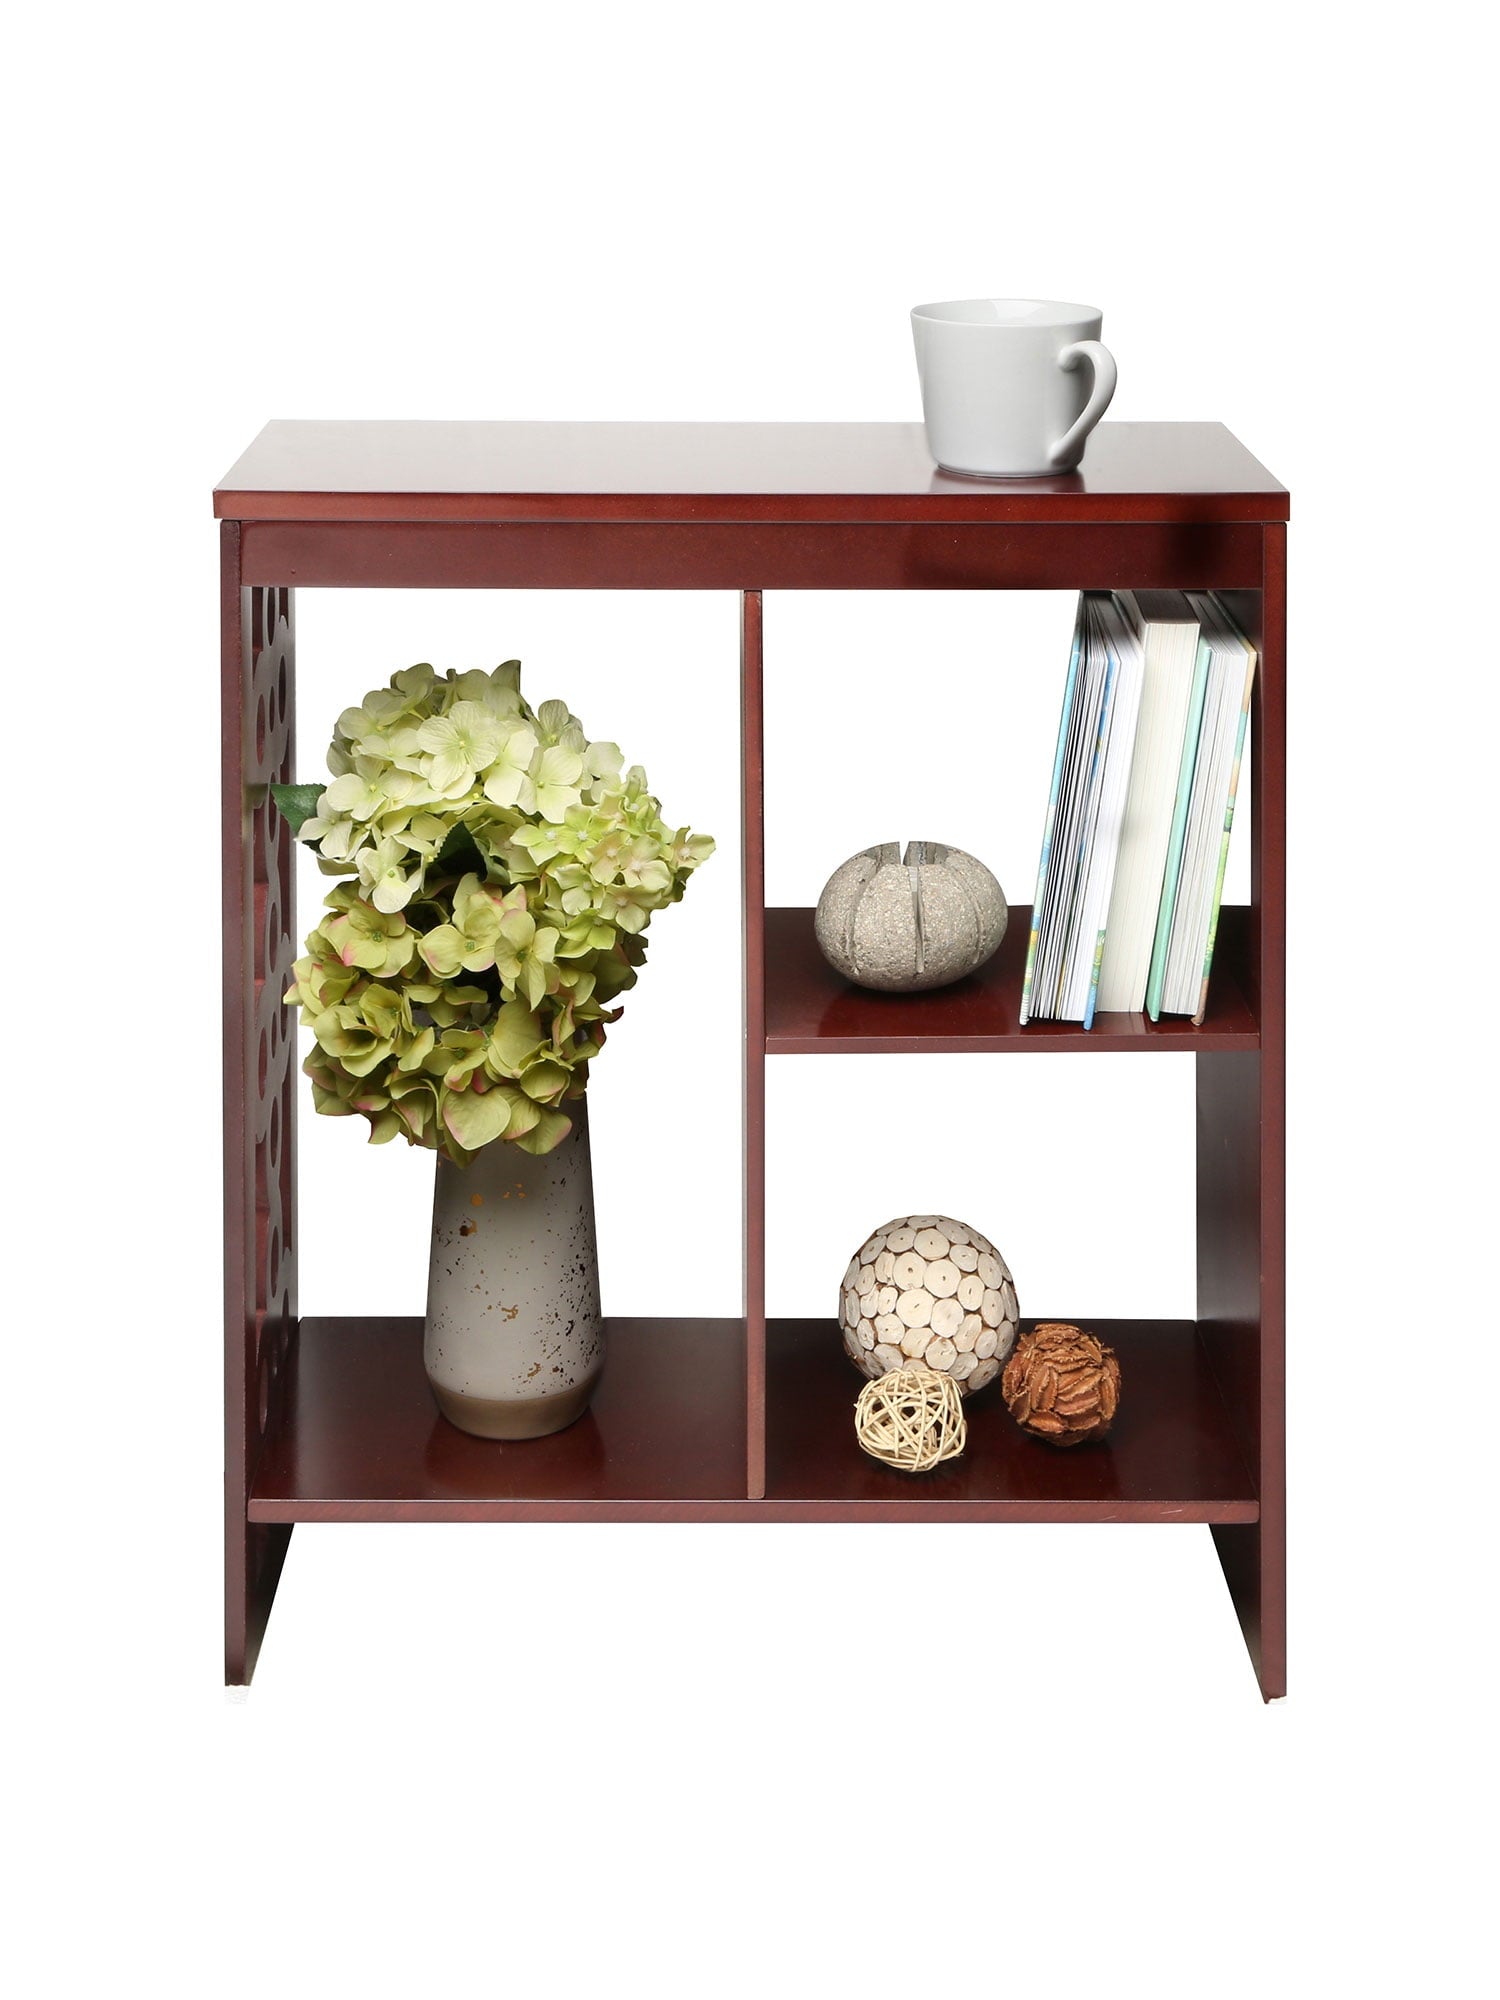 ETNA Products ETNA Slim End Table with Shelves, Narrow Side Table with Storage